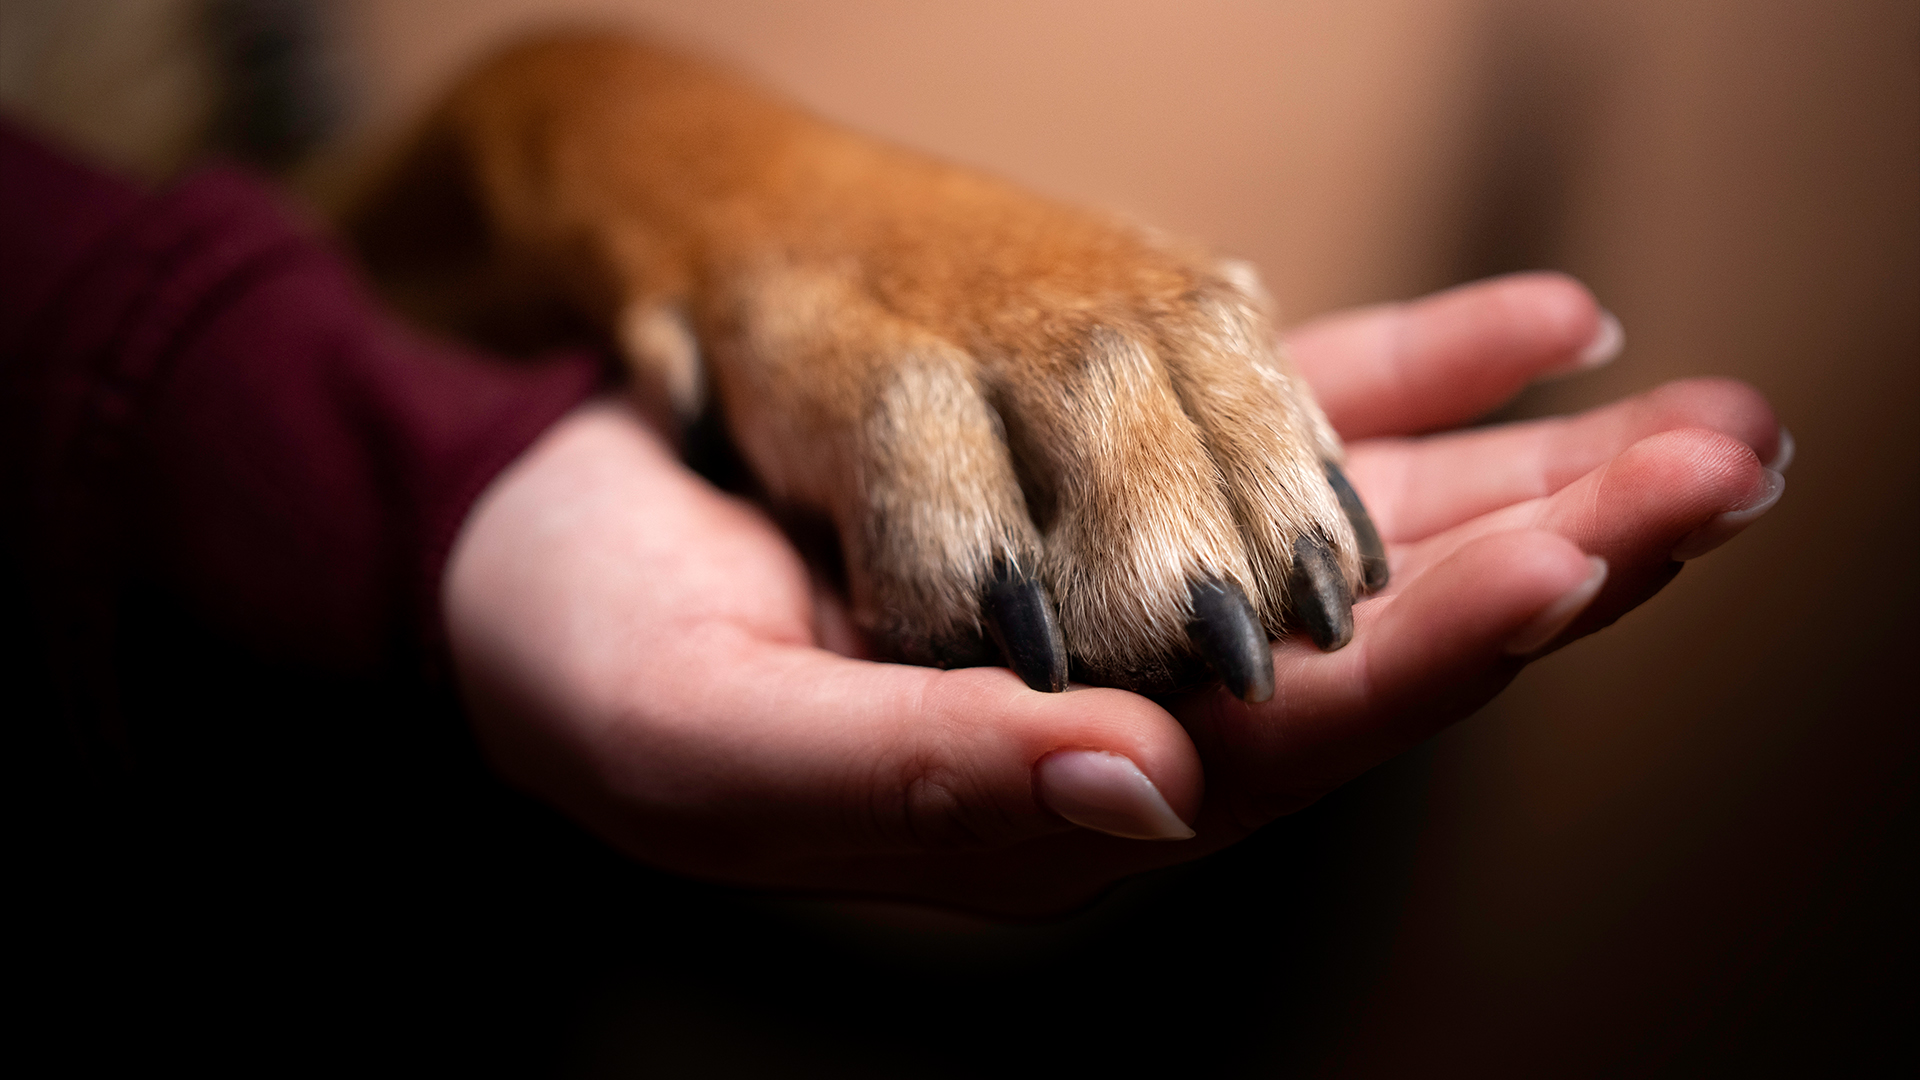 Dog's paw on a human hand. Image of friendship between man and dog.